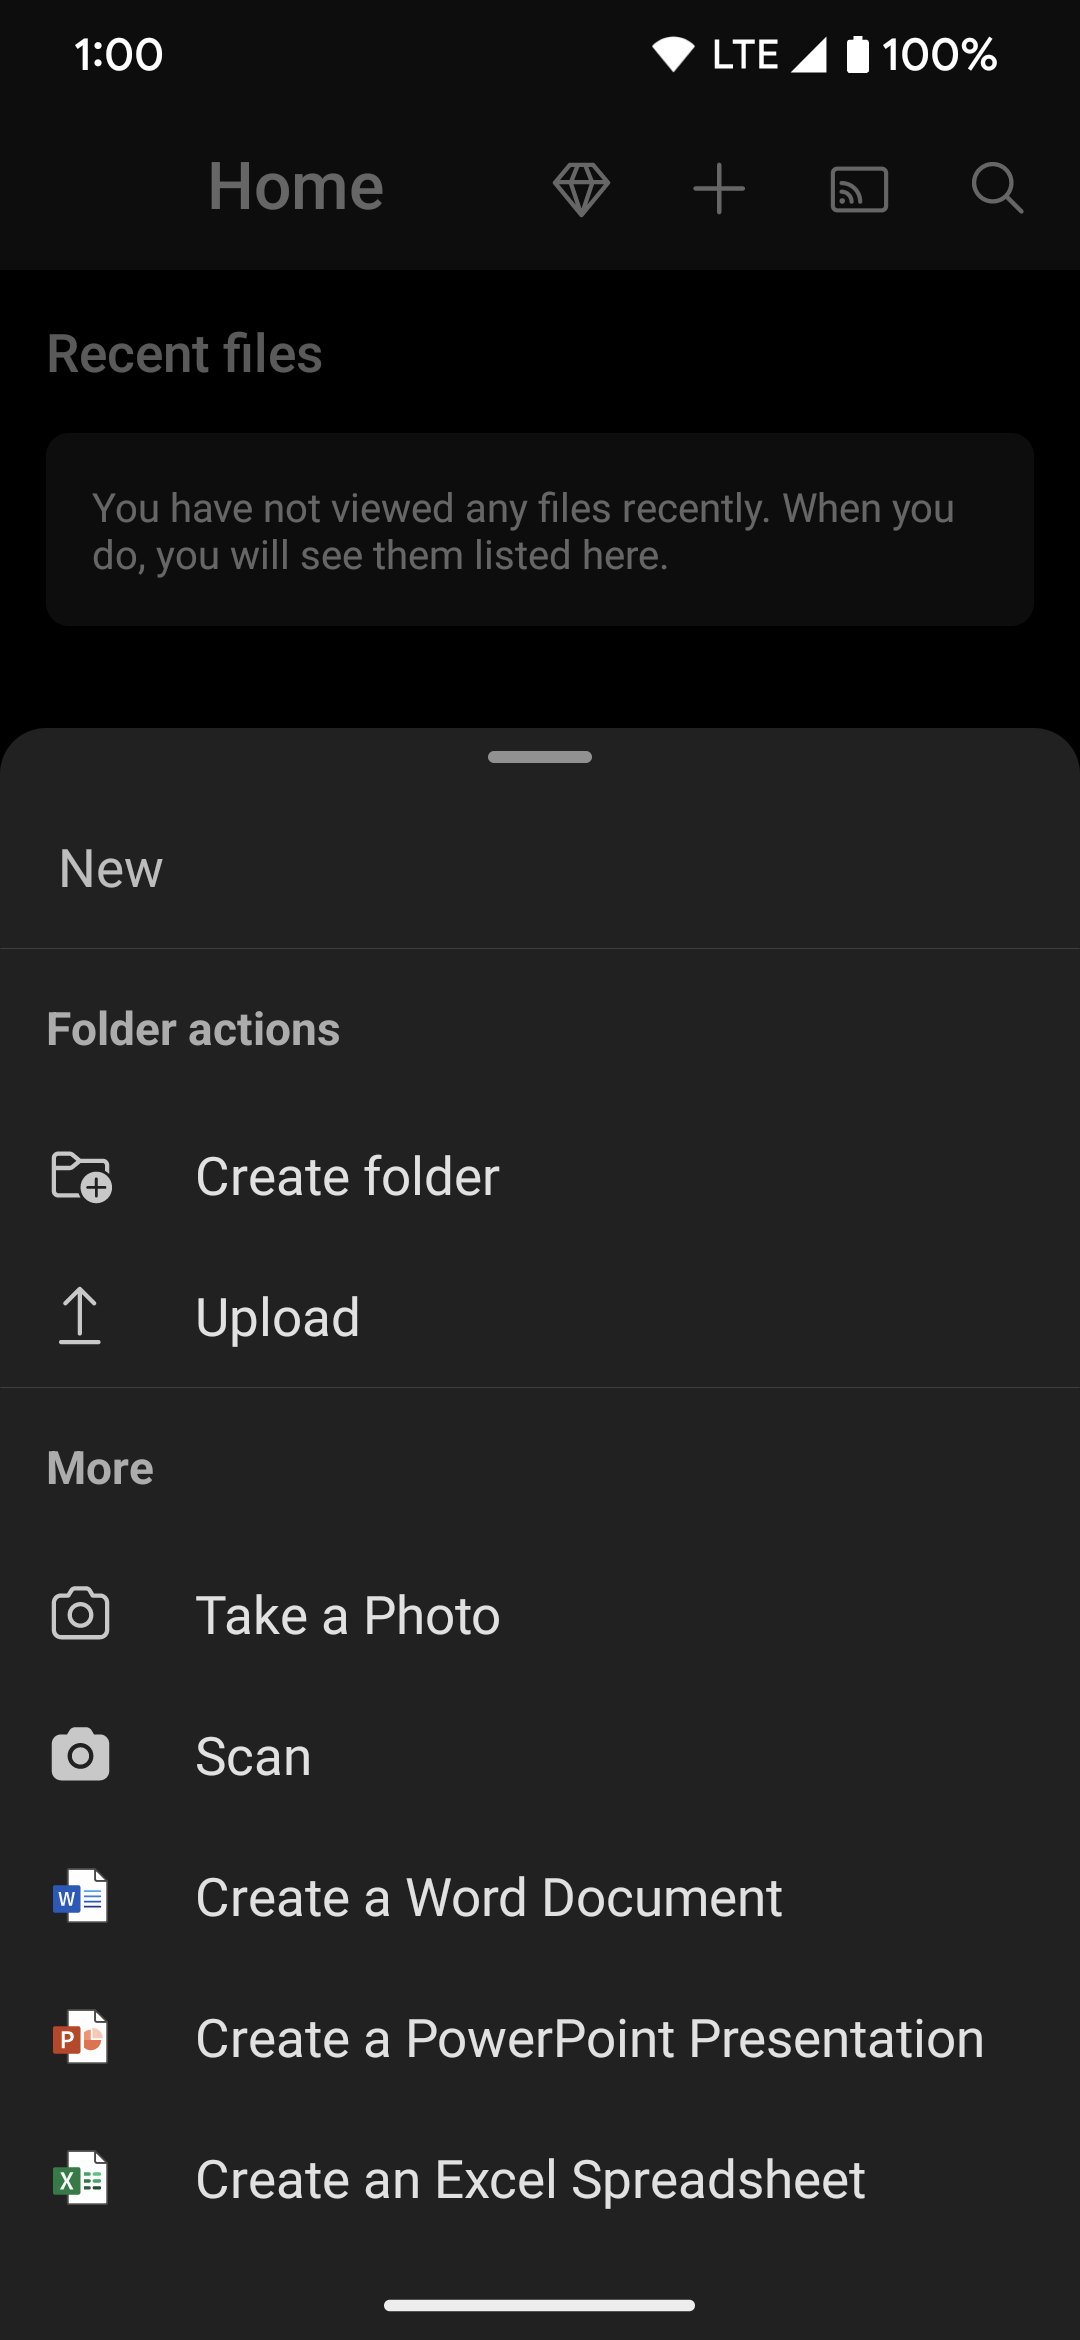 The upload options in the OneDrive app when uploading a new file